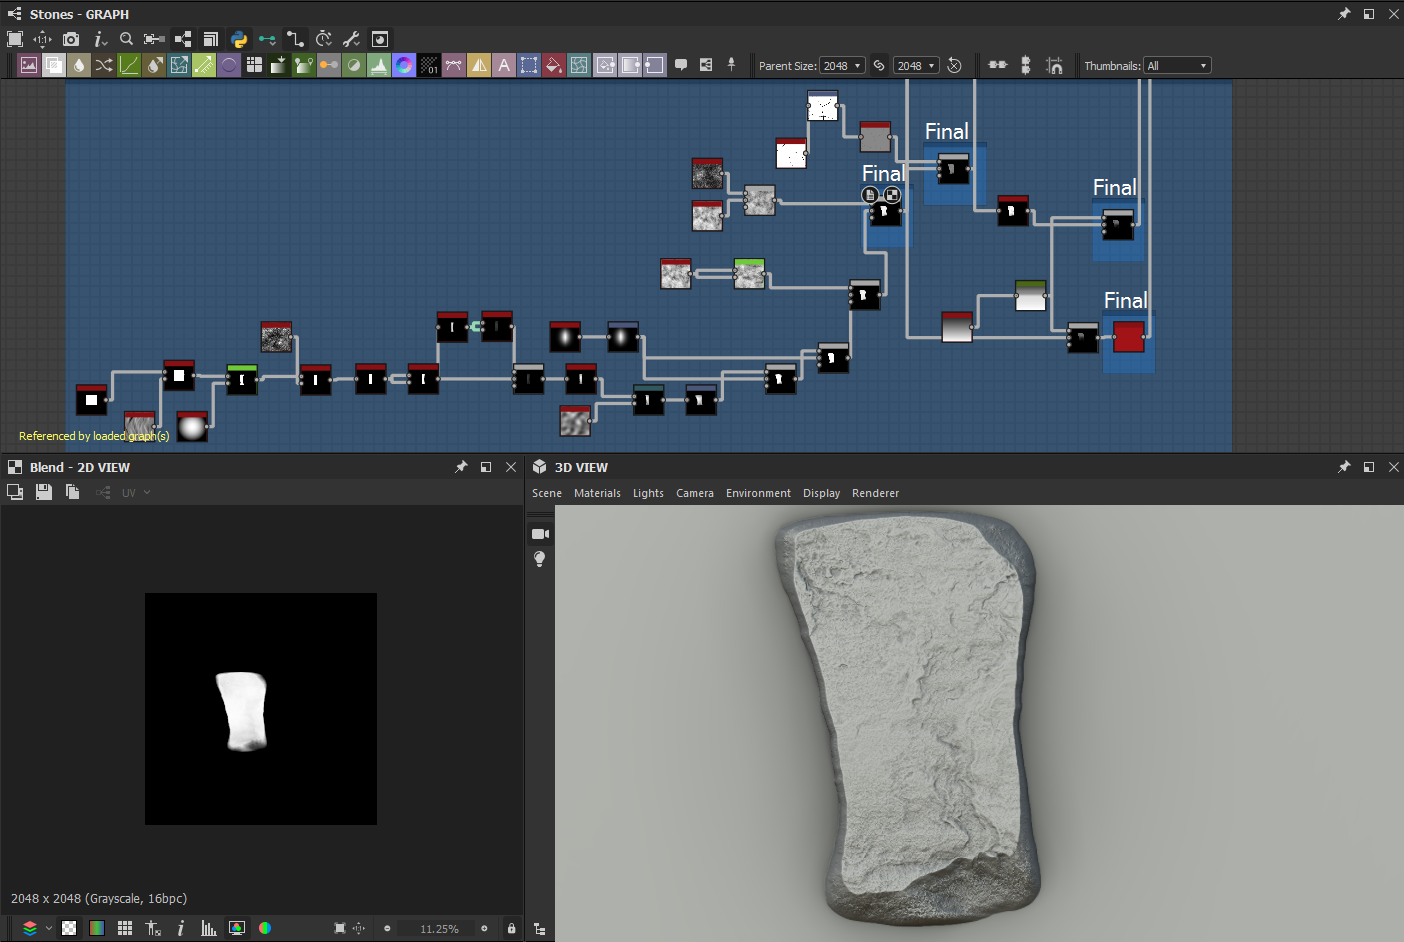 Using Substance Designer graph to construct a procedural rock in the foreground.